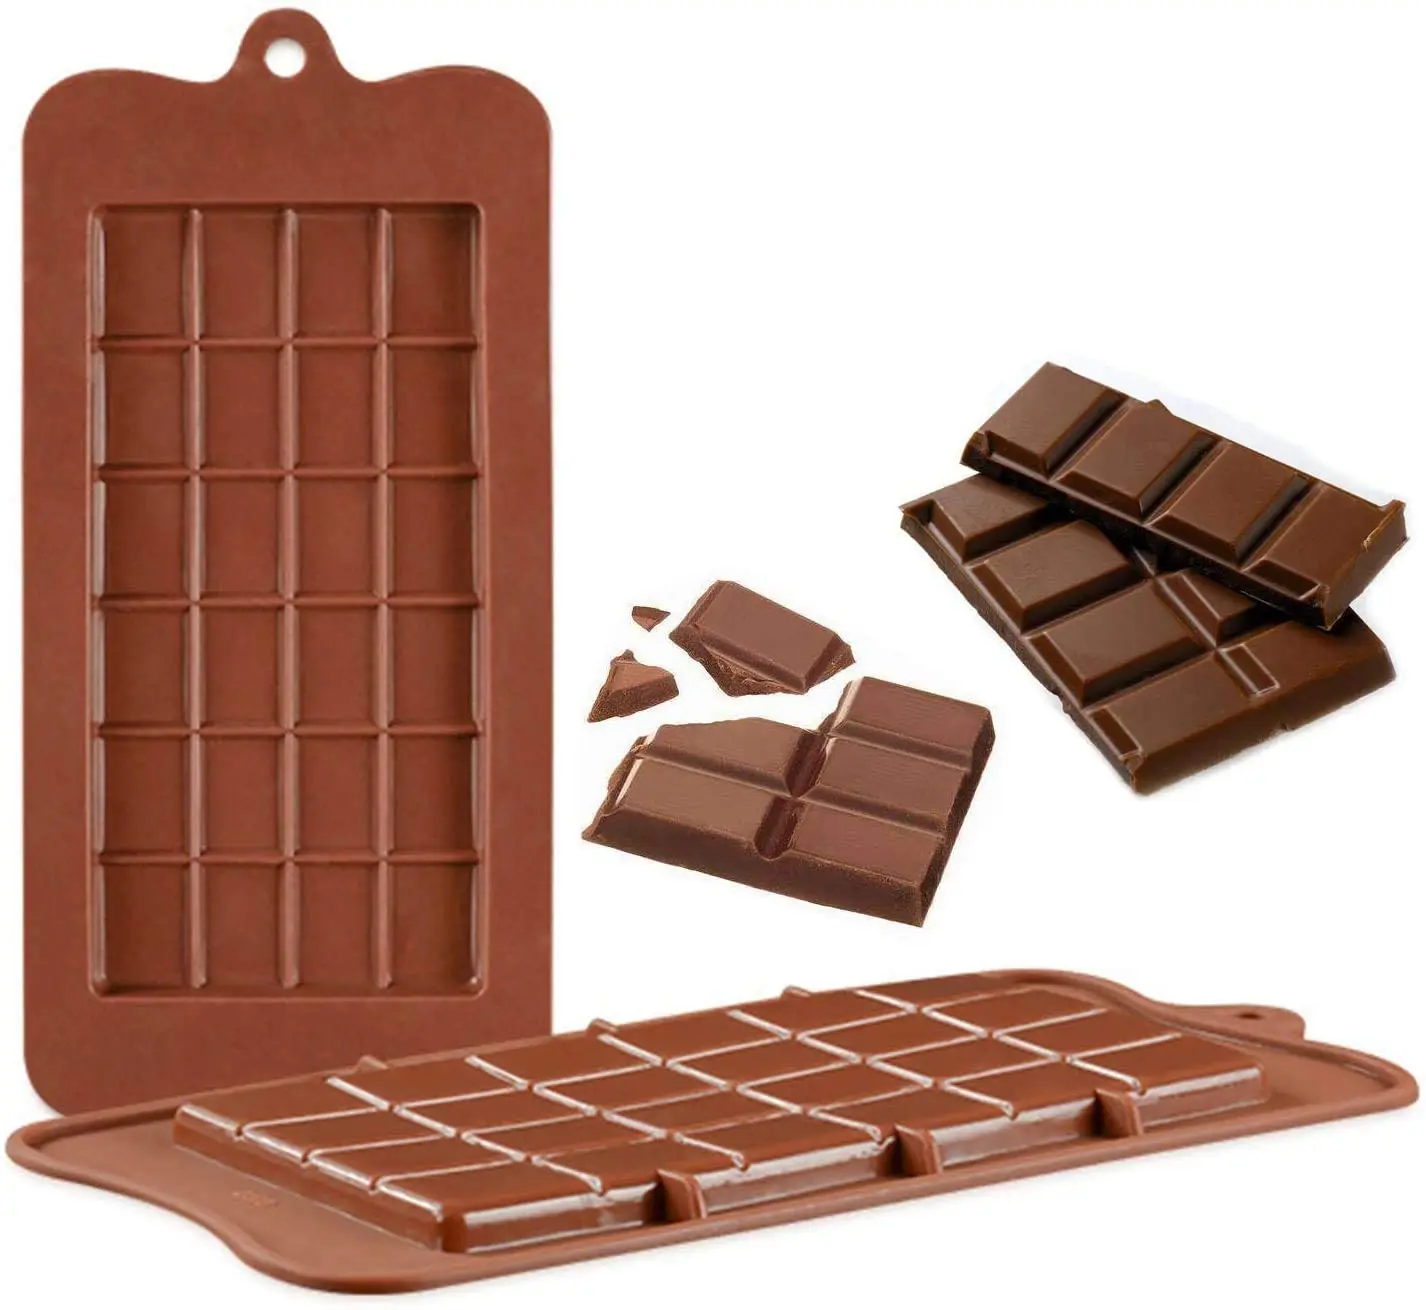 Break Apart Chocolate Moulds Silicone Candy Molds 3 PCS Chocolate Molds Non-Stick Reusable DIY Baking Molds Candy Protein & Energy Bar Molds 